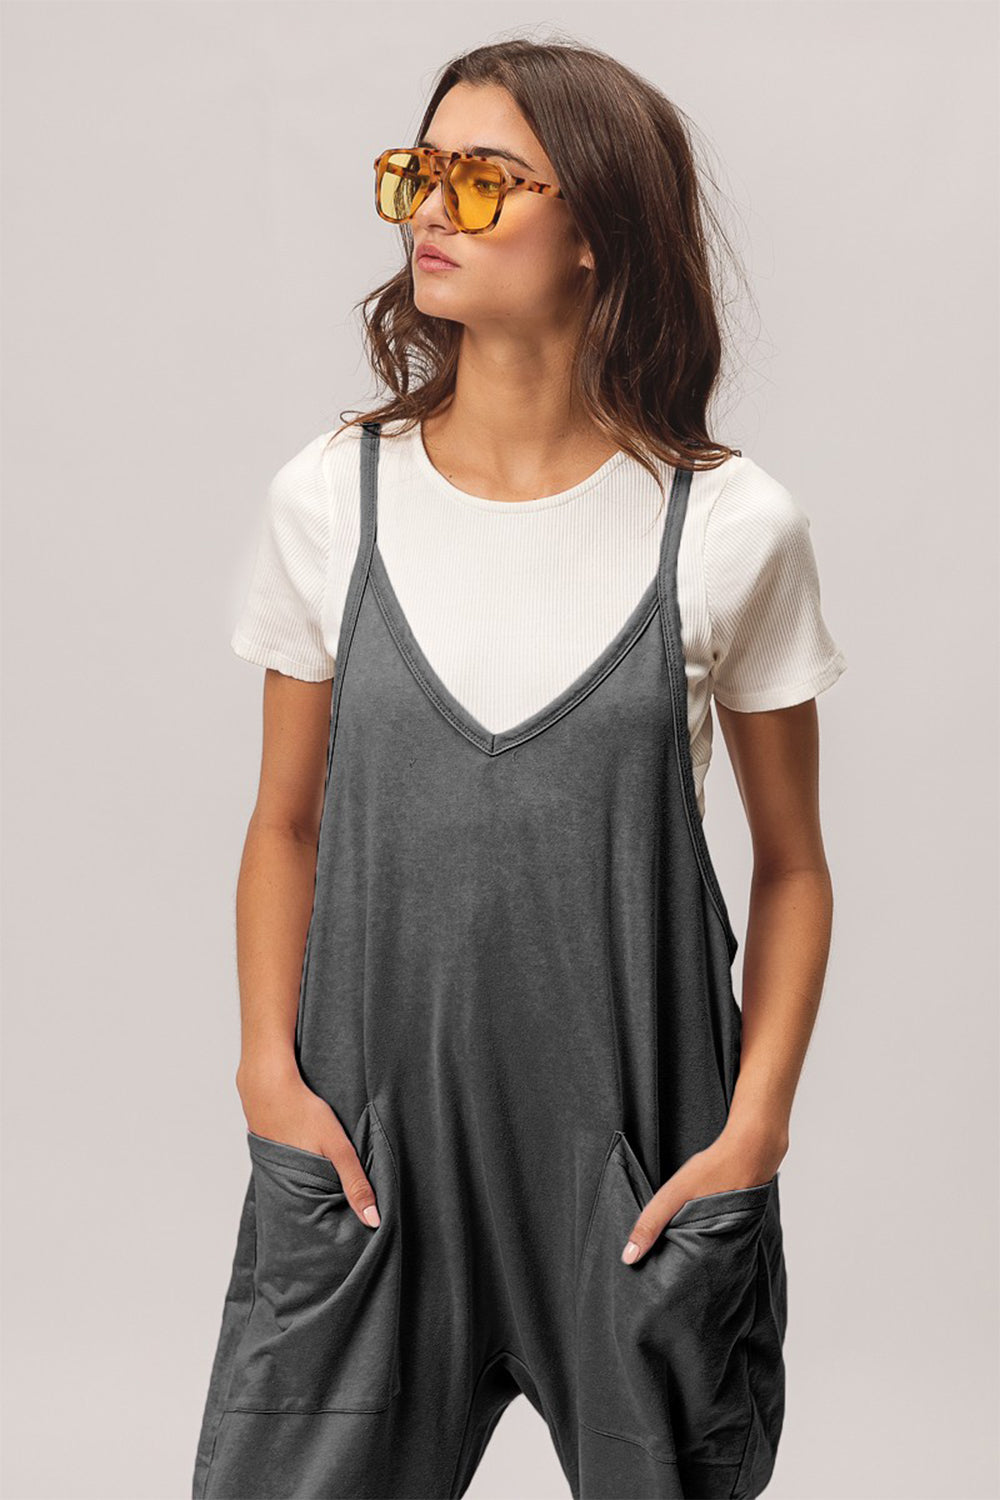 Dark Slate Gray BiBi Washed Sleeveless Overalls with Front Pockets Sentient Beauty Fashions Apparel & Accessories